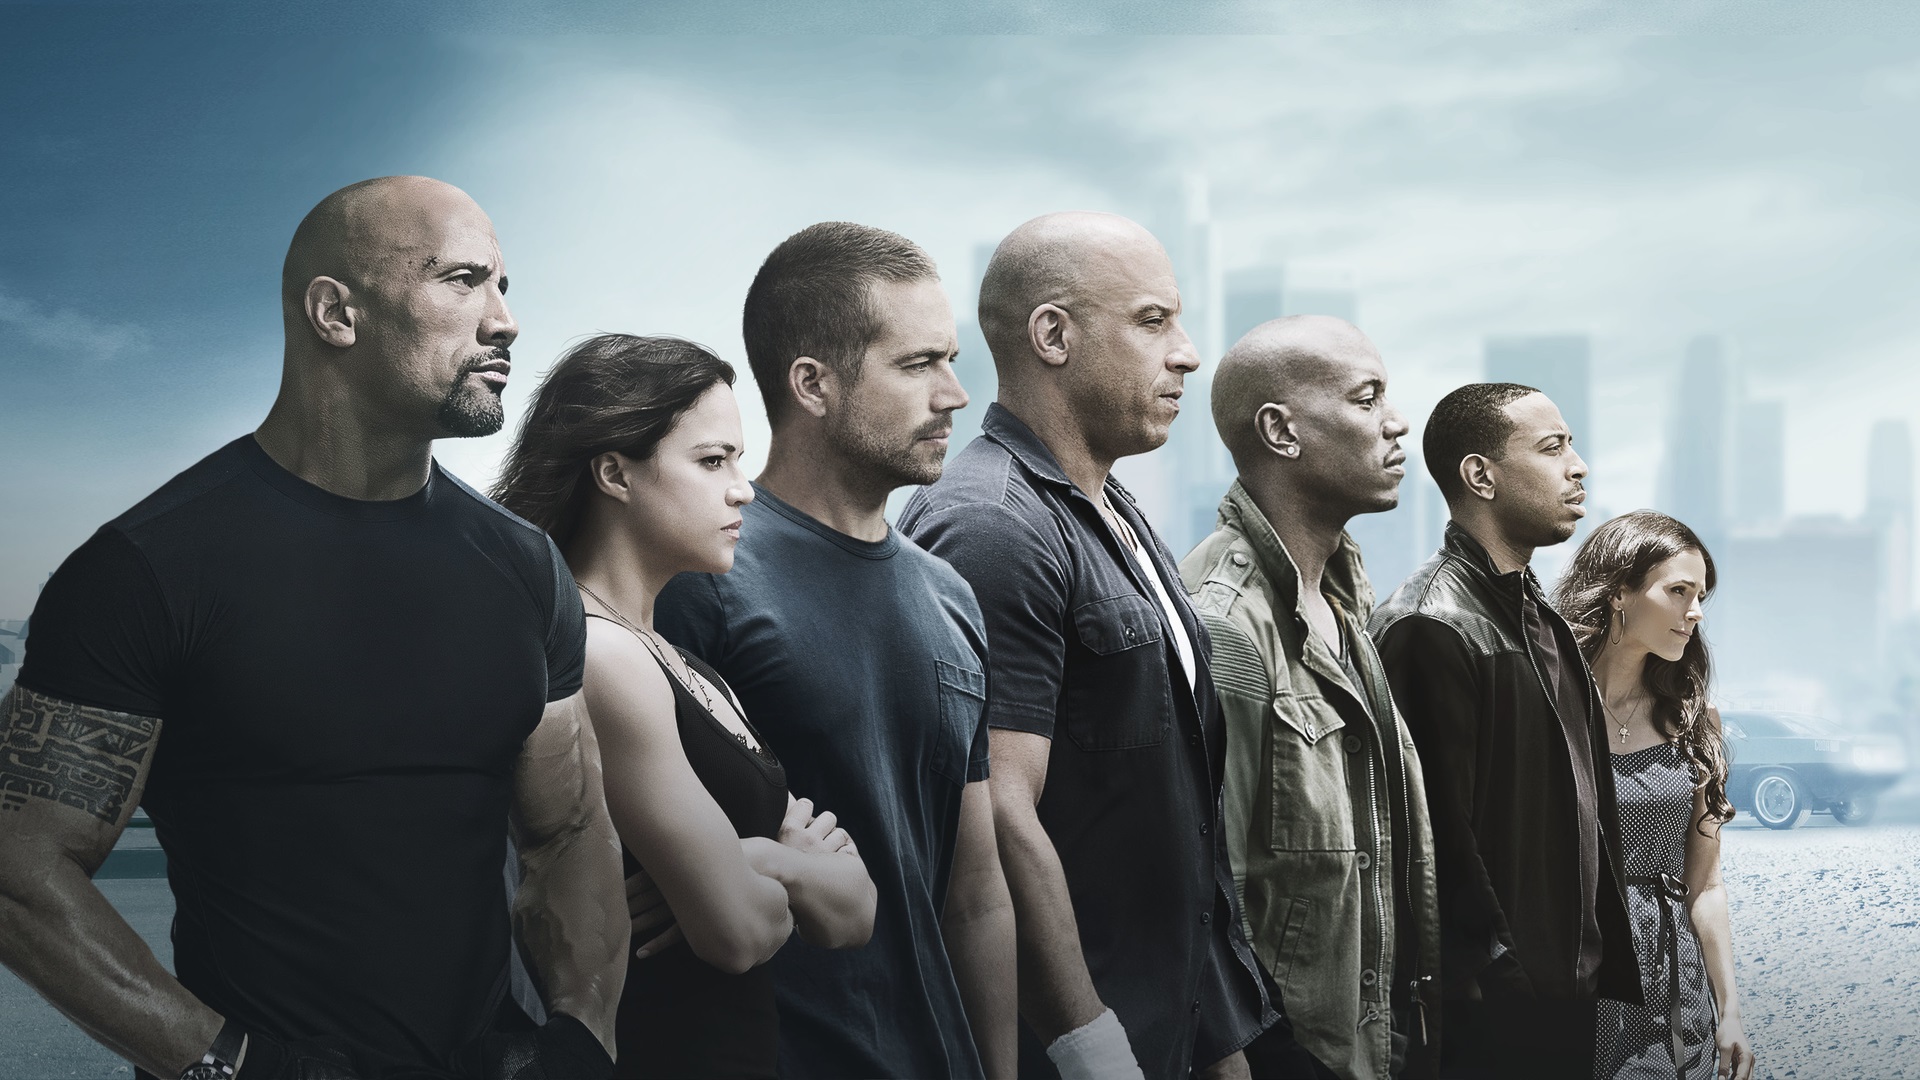 fast and furious 8 full movie download in hd 1080p